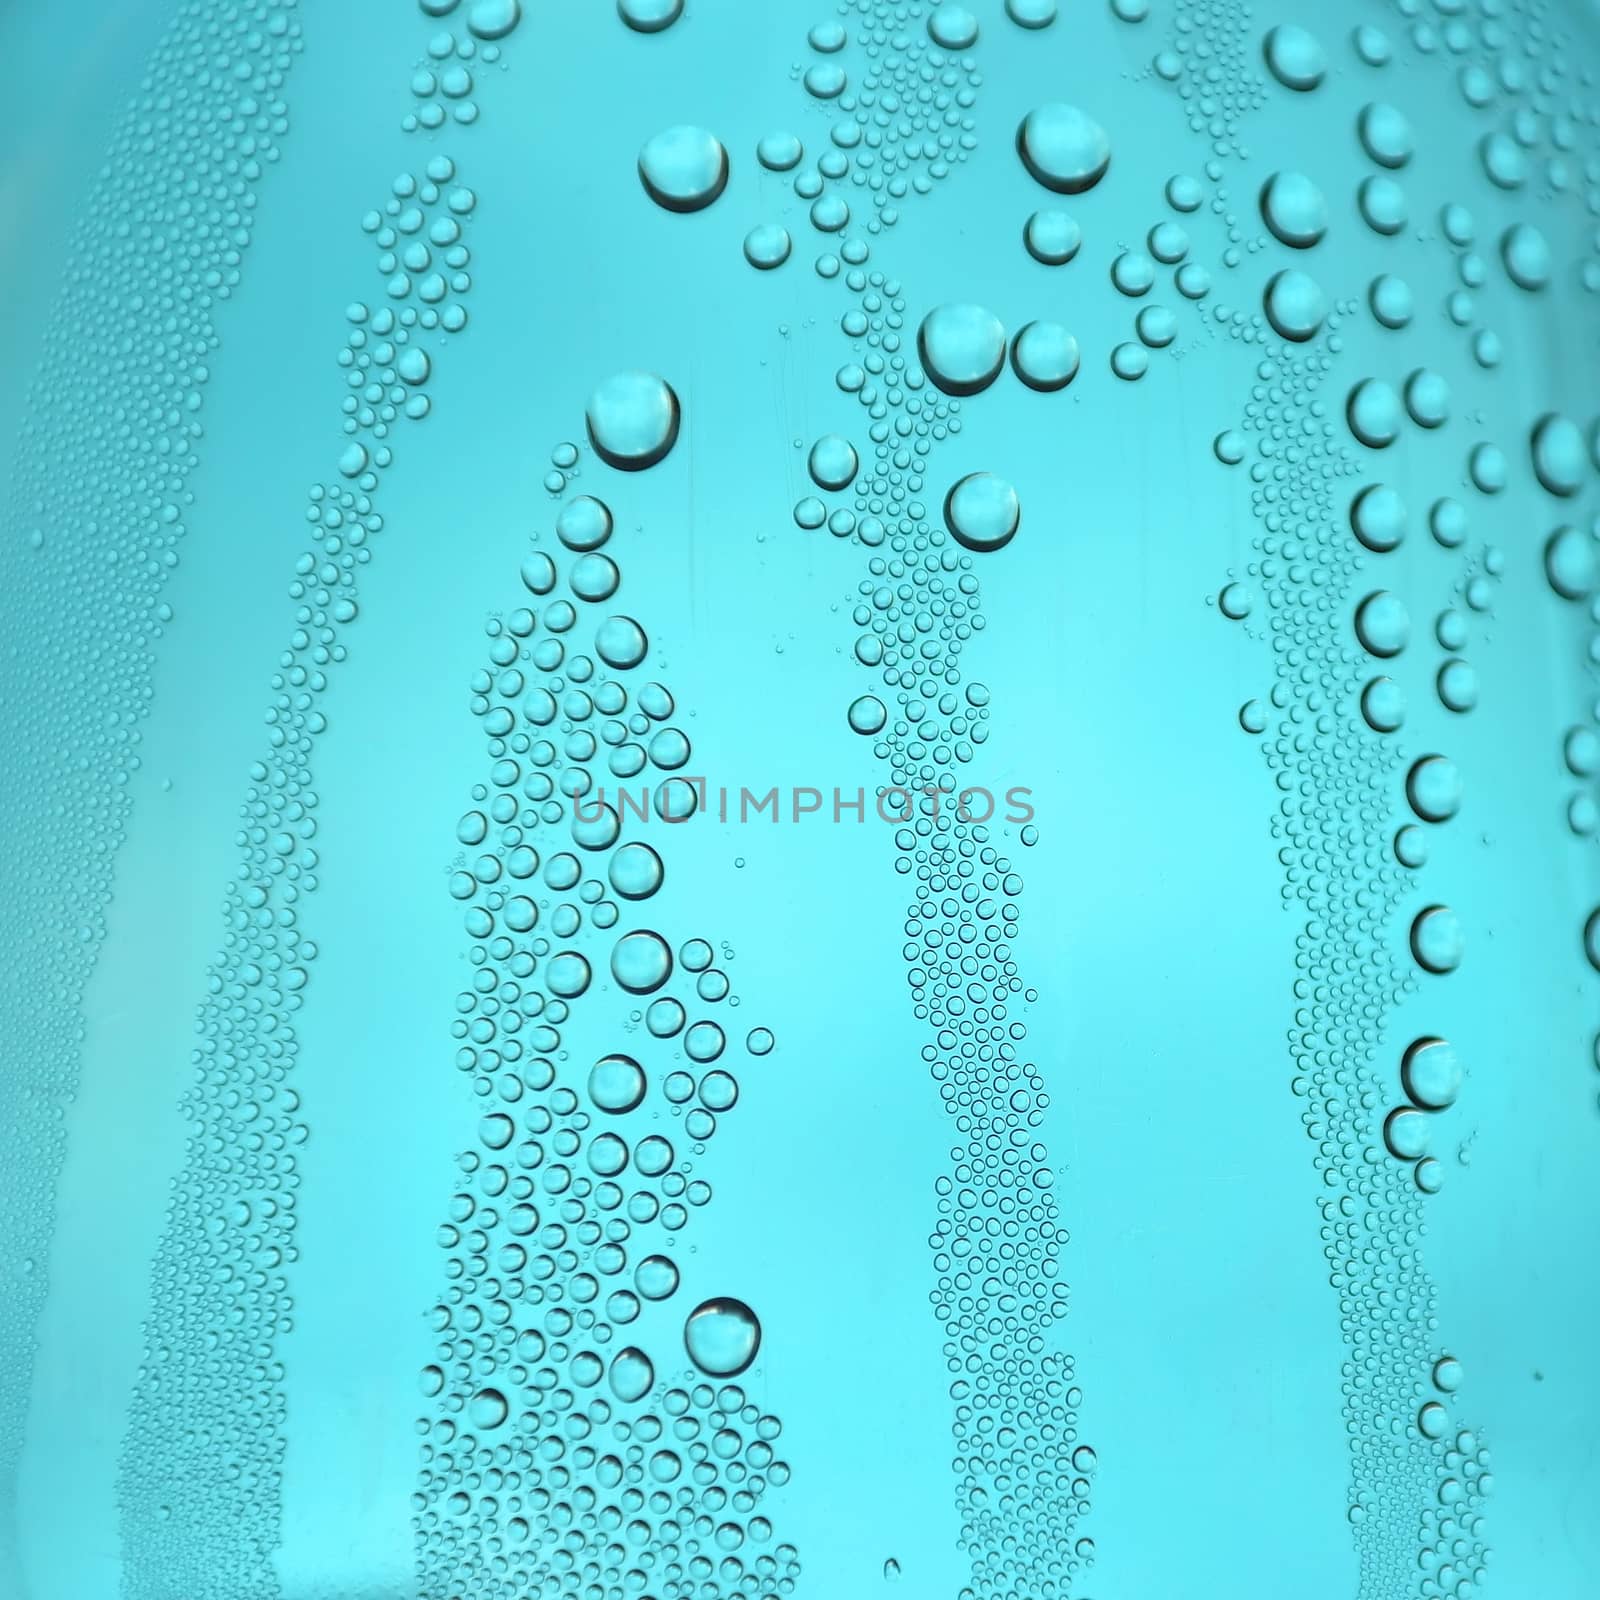 Drops of water on the glass by sergpet